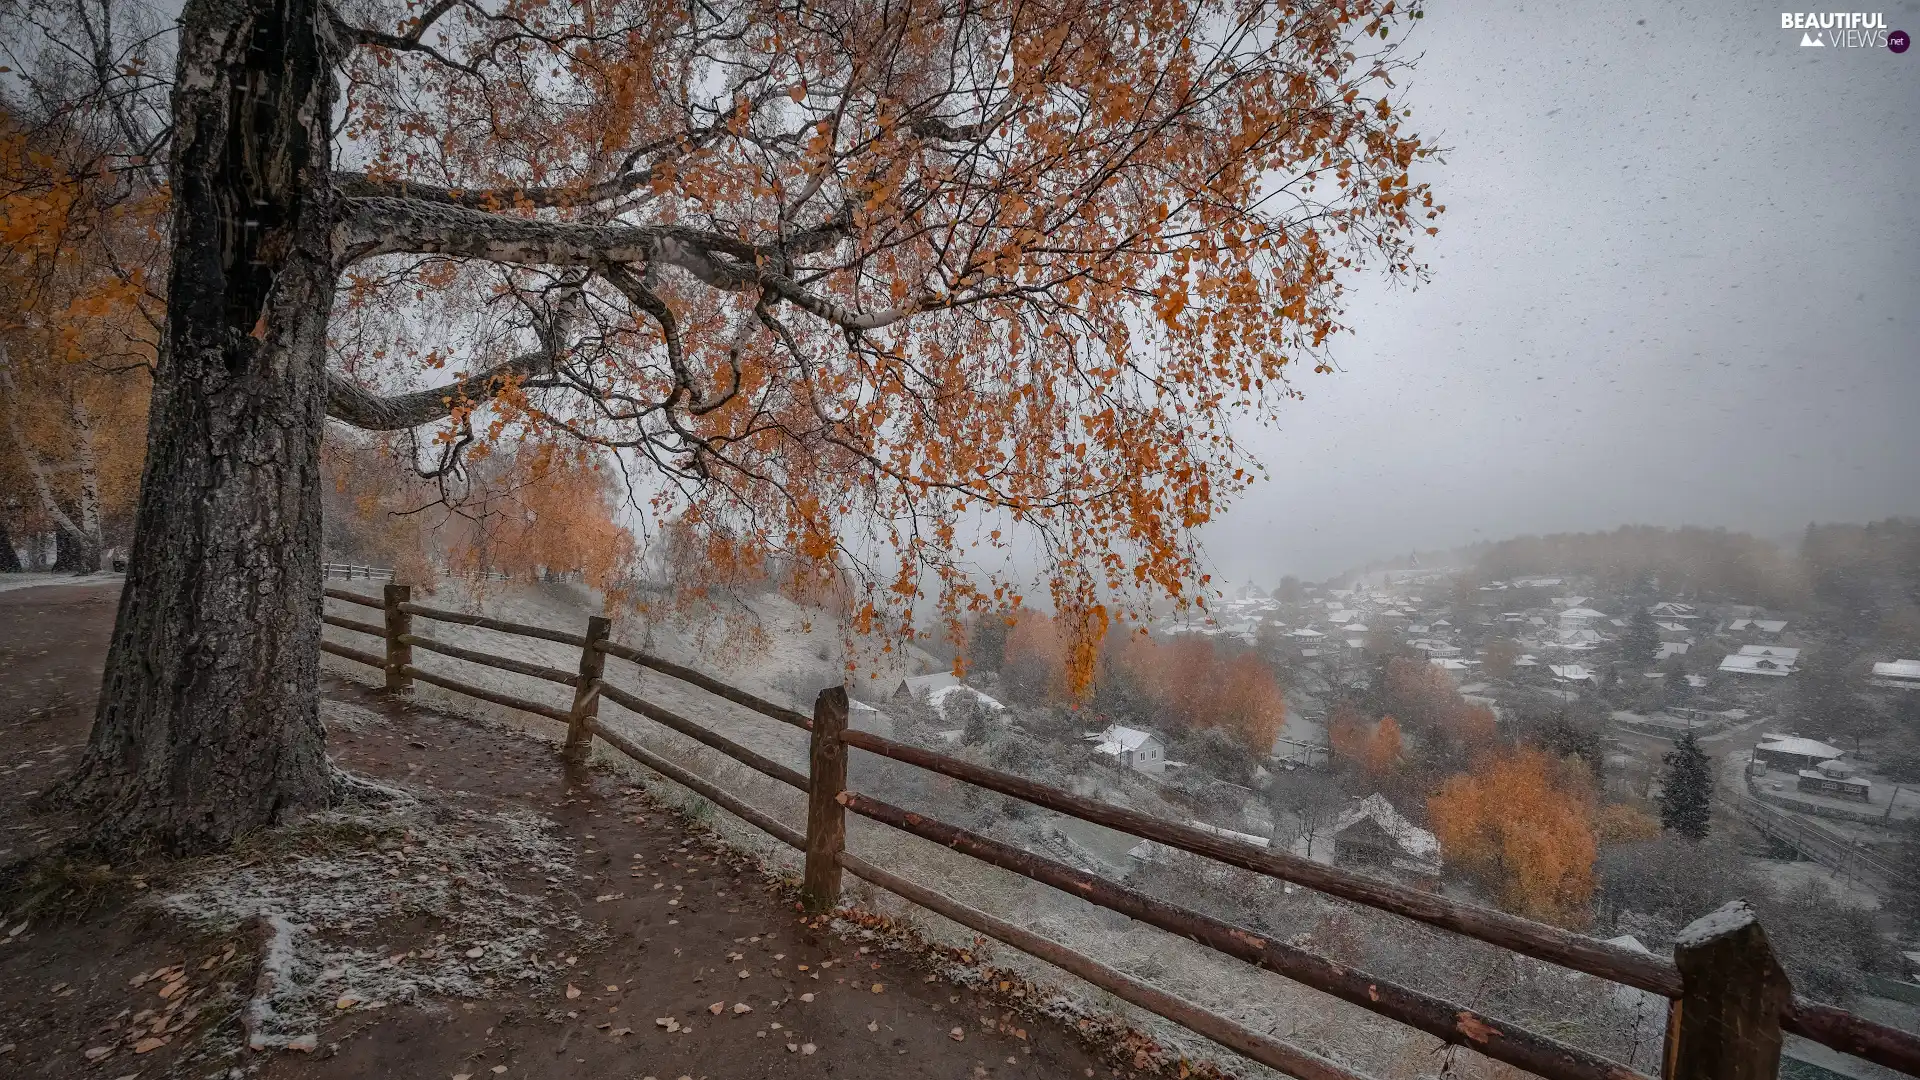 viewes, Mountains, snow, fence, incident, trees, autumn, Houses